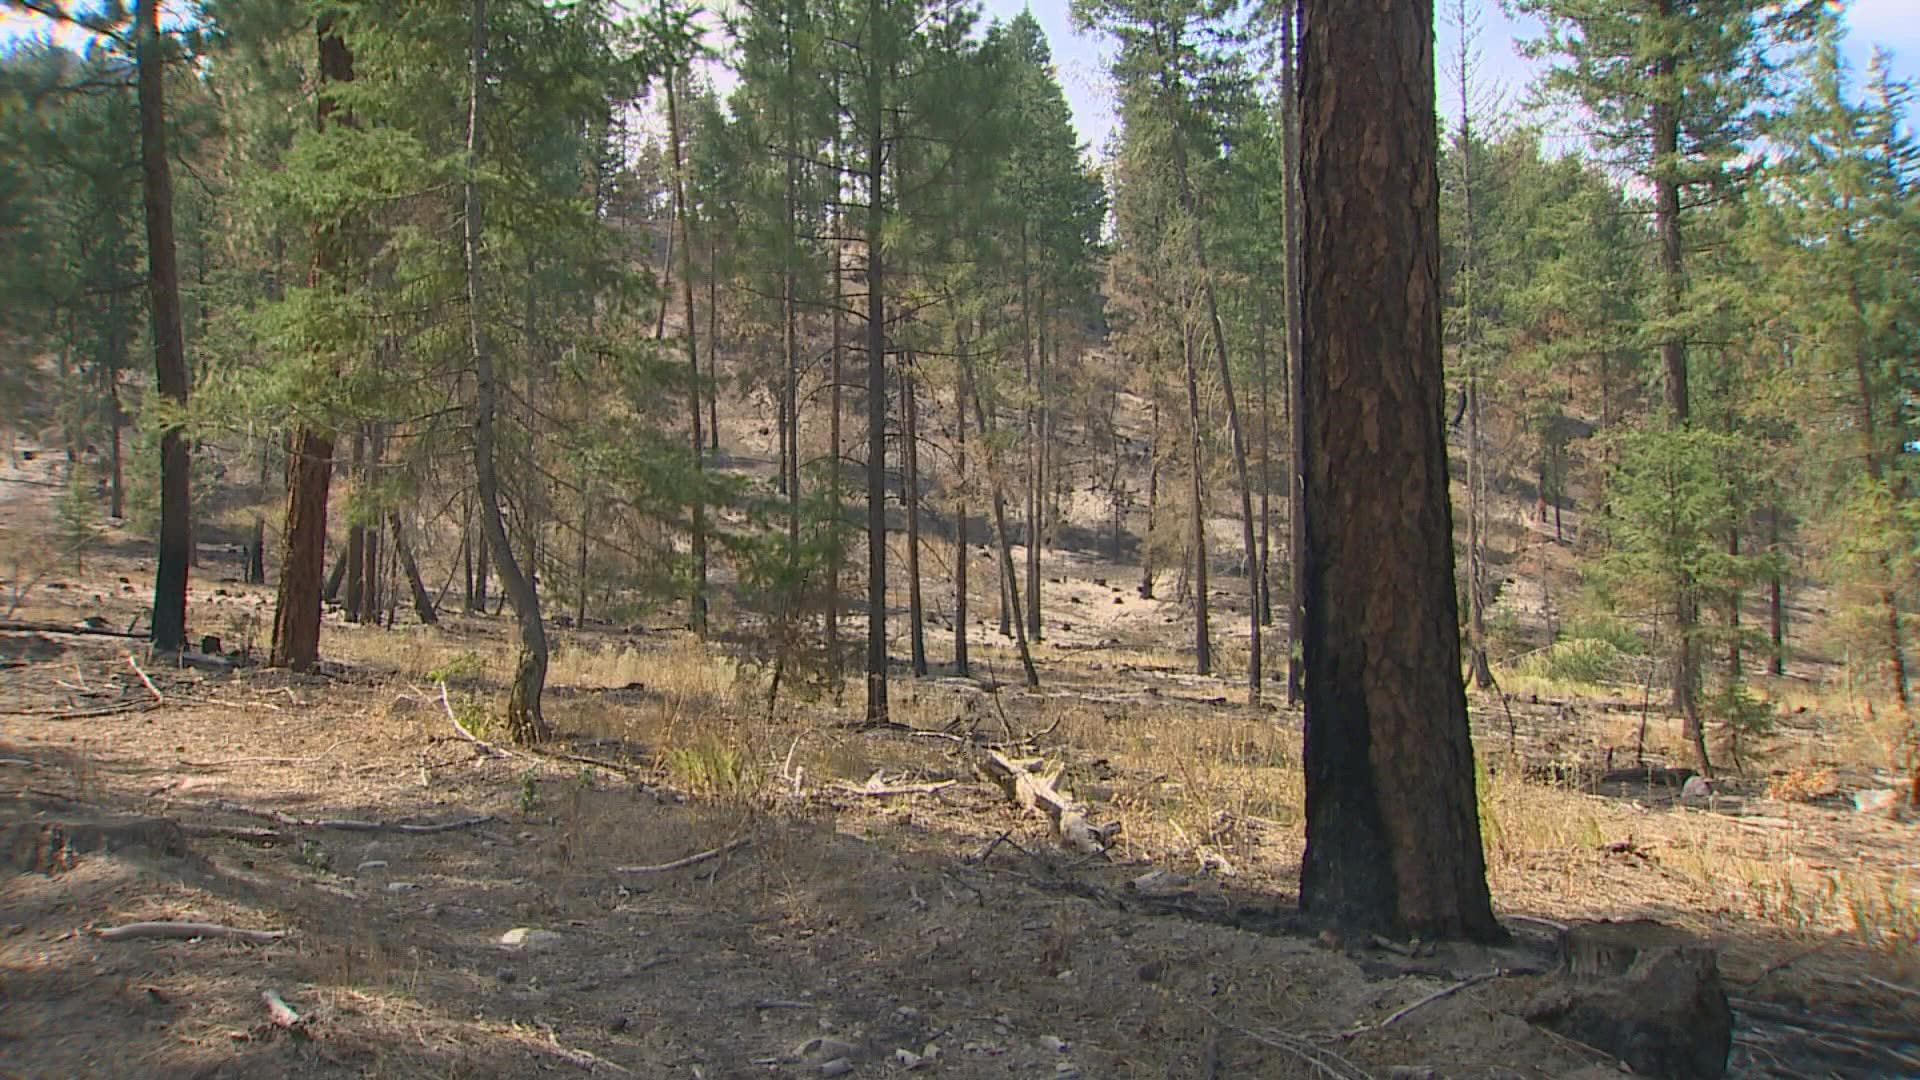 Experts with the state's Department of Natural Resources are treating acres of forests in an effort to make them healthier and more fire resistant.